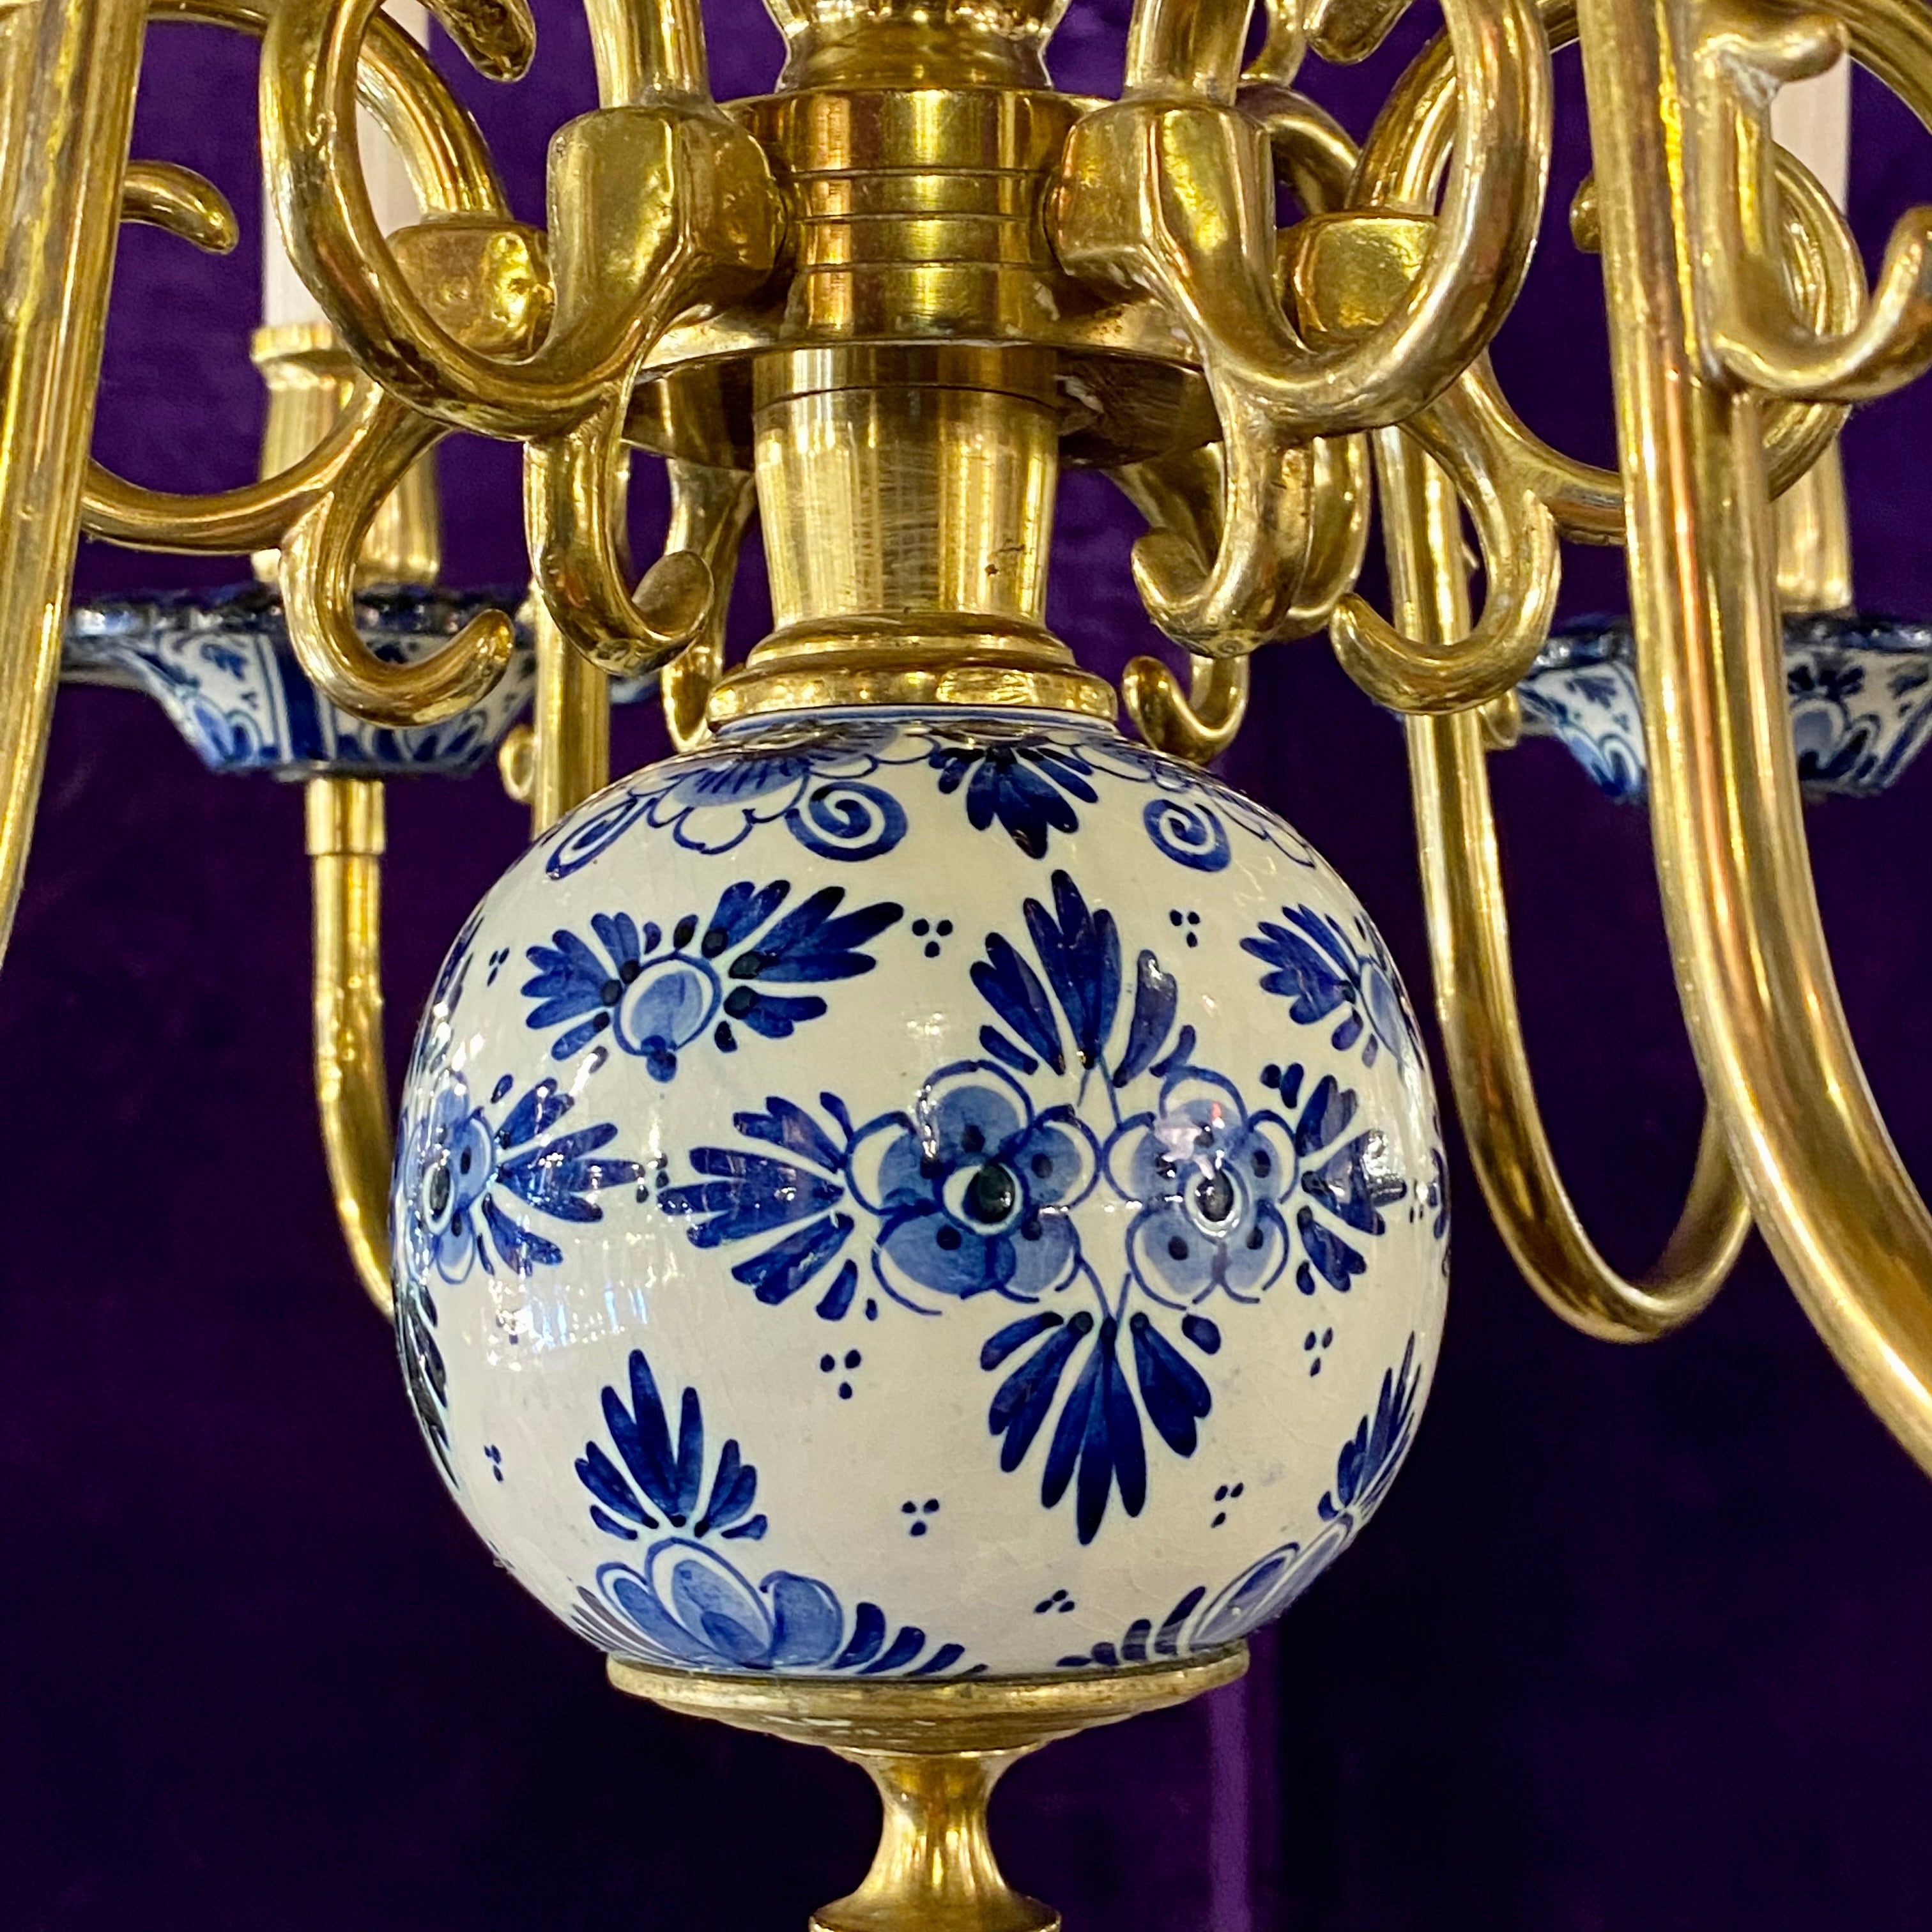 Hand Painted Delft Chandelier